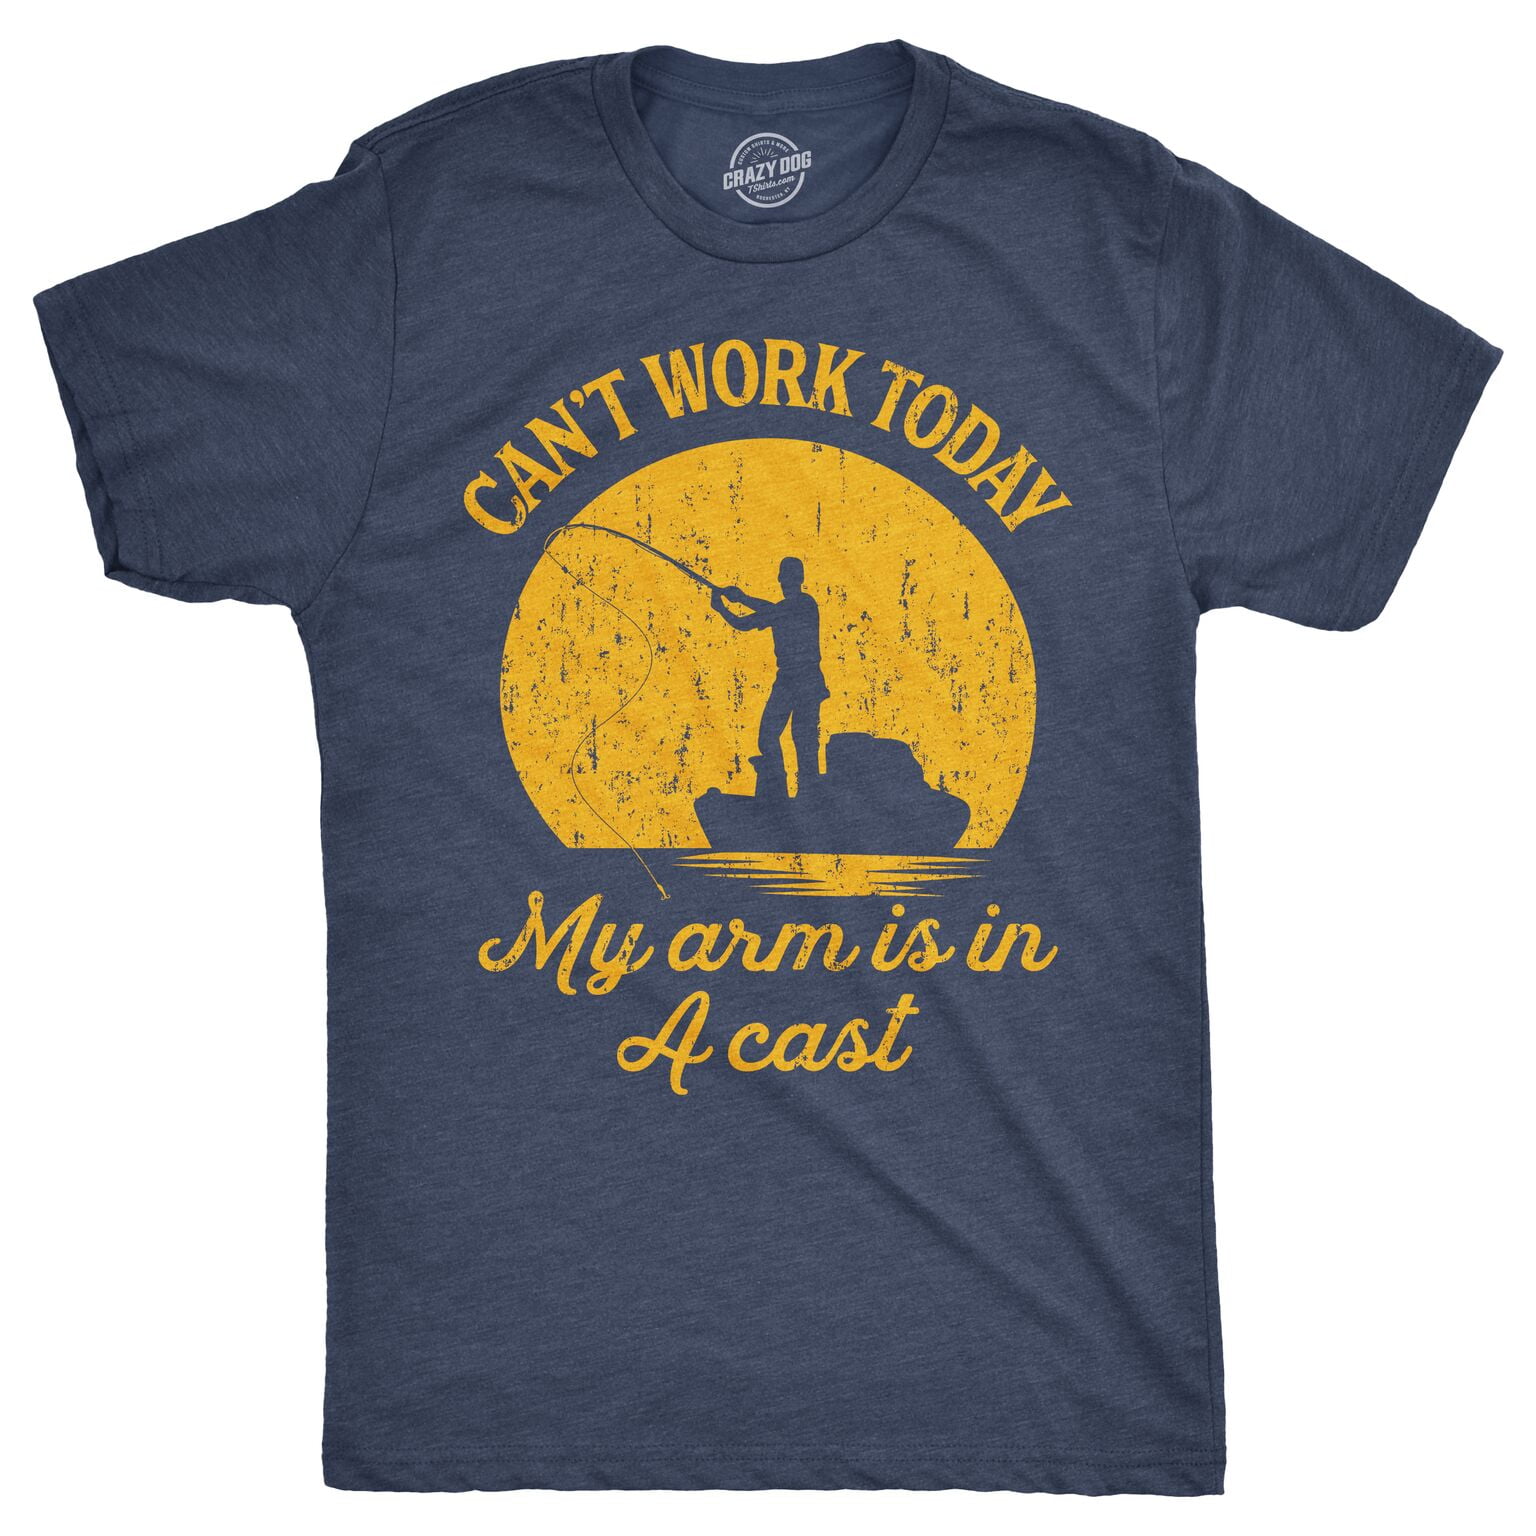 Can't Work Today My Arm Is In A Cast T-Shirt Funny Fishing Fathers Day Tee (Heather Navy) - S Graphic Tees - Walmart.com